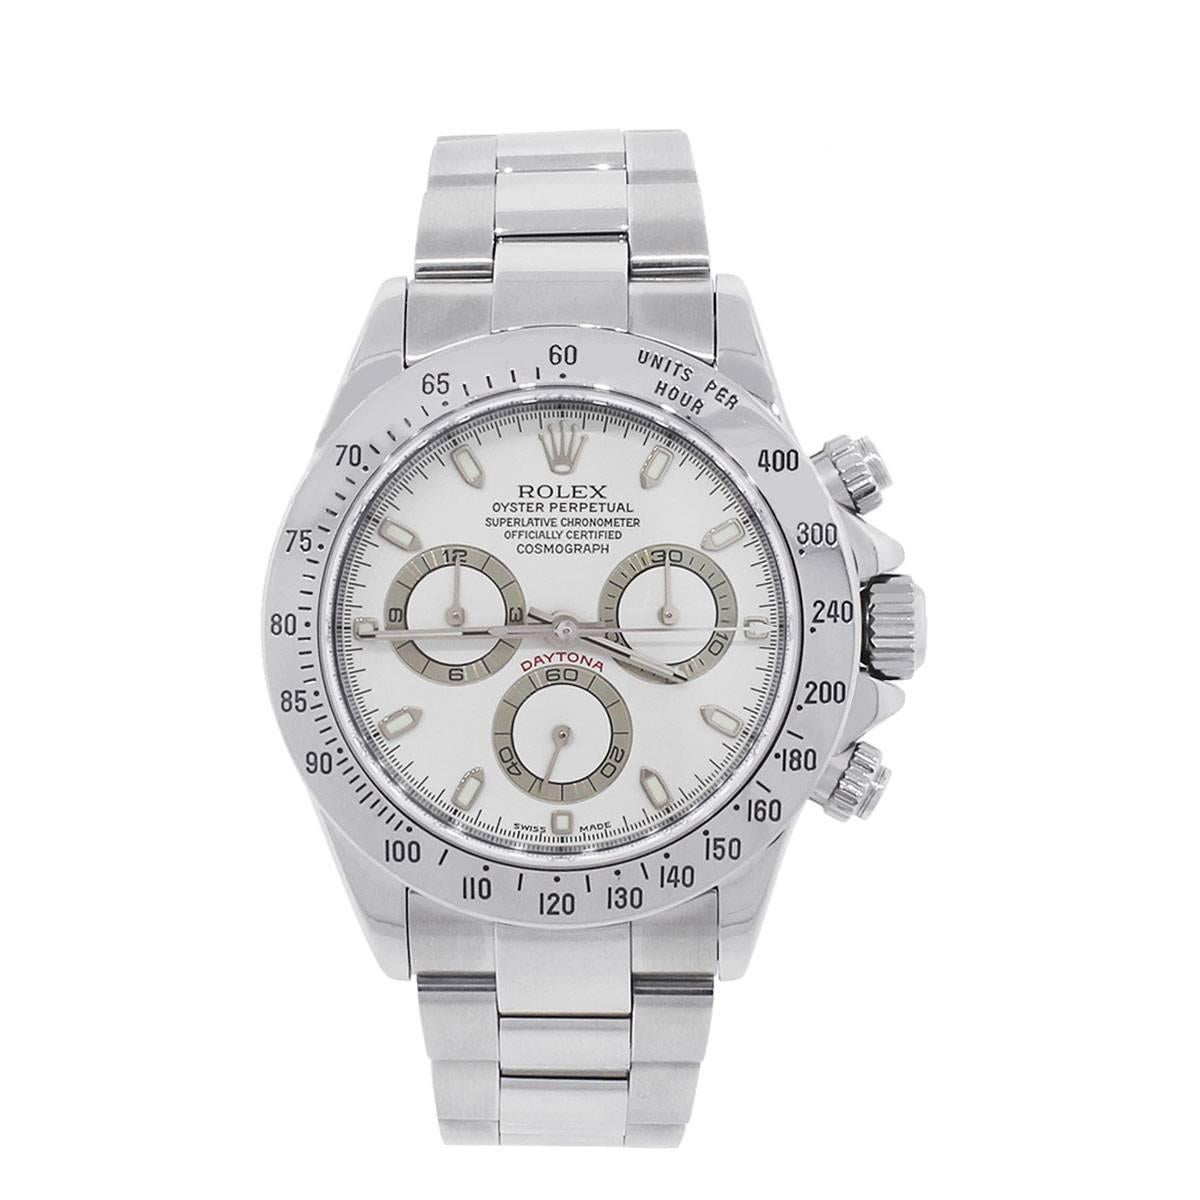 Brand: Rolex
MPN: 116520
Serial: “P” serial
Model: Daytona
Case Material: Stainless steel
Case Diameter: 40mm
Crystal: Scratch resistant sapphire
Bezel: Stainless steel bezel
Dial: White dial
Bracelet: Stainless steel oyster band
Size: 7″
Clasp: